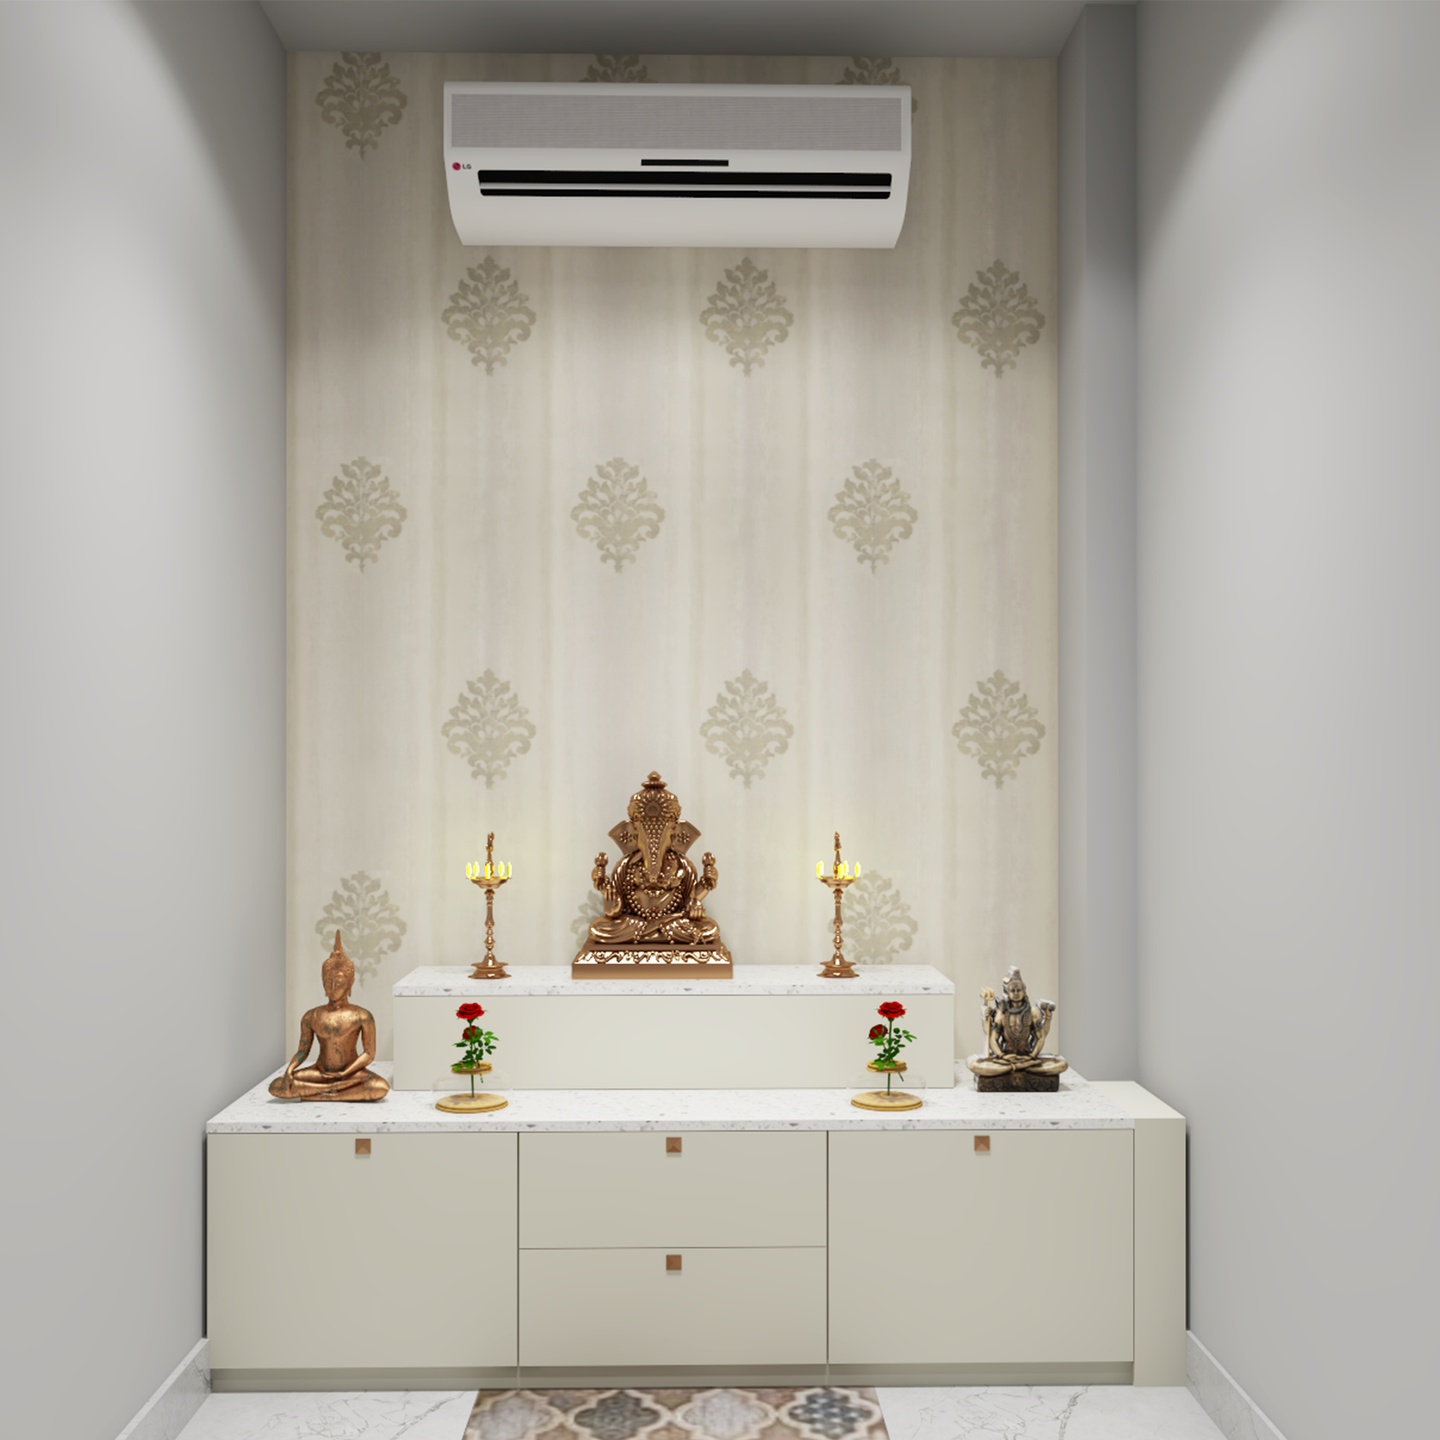 Step Style Modern Spacious Pooja Room Design with Patterned Wall - Livspace